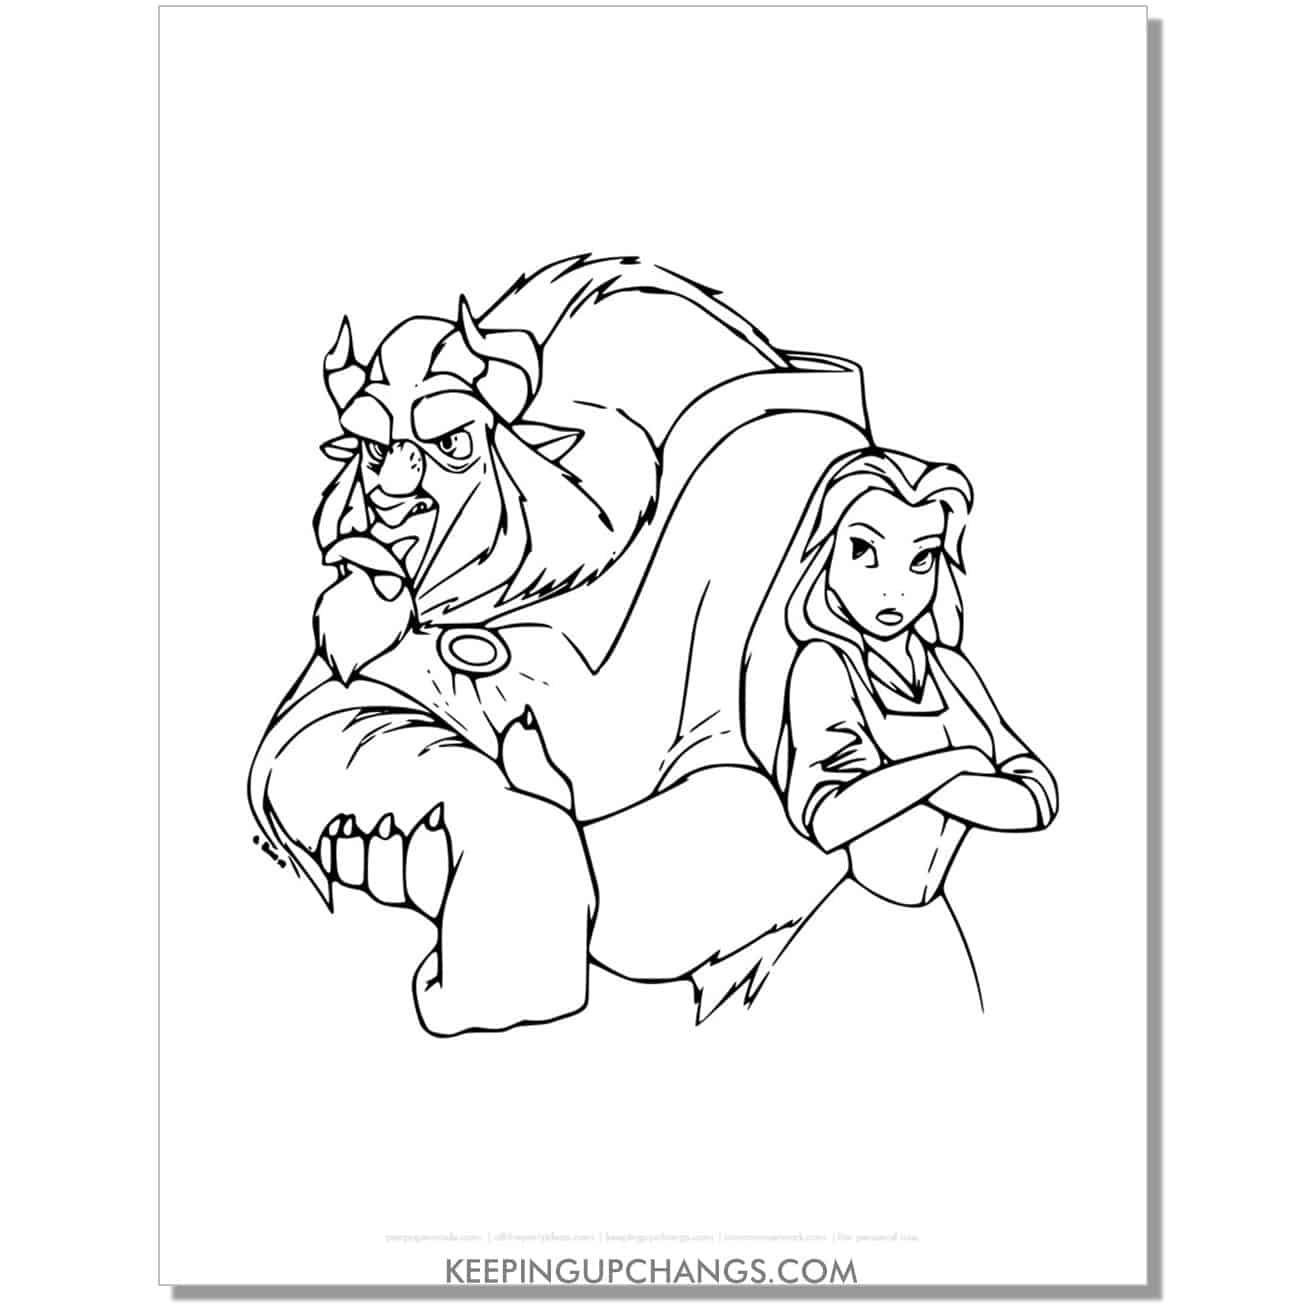 beauty and beast belle upset at each other coloring page, sheet.